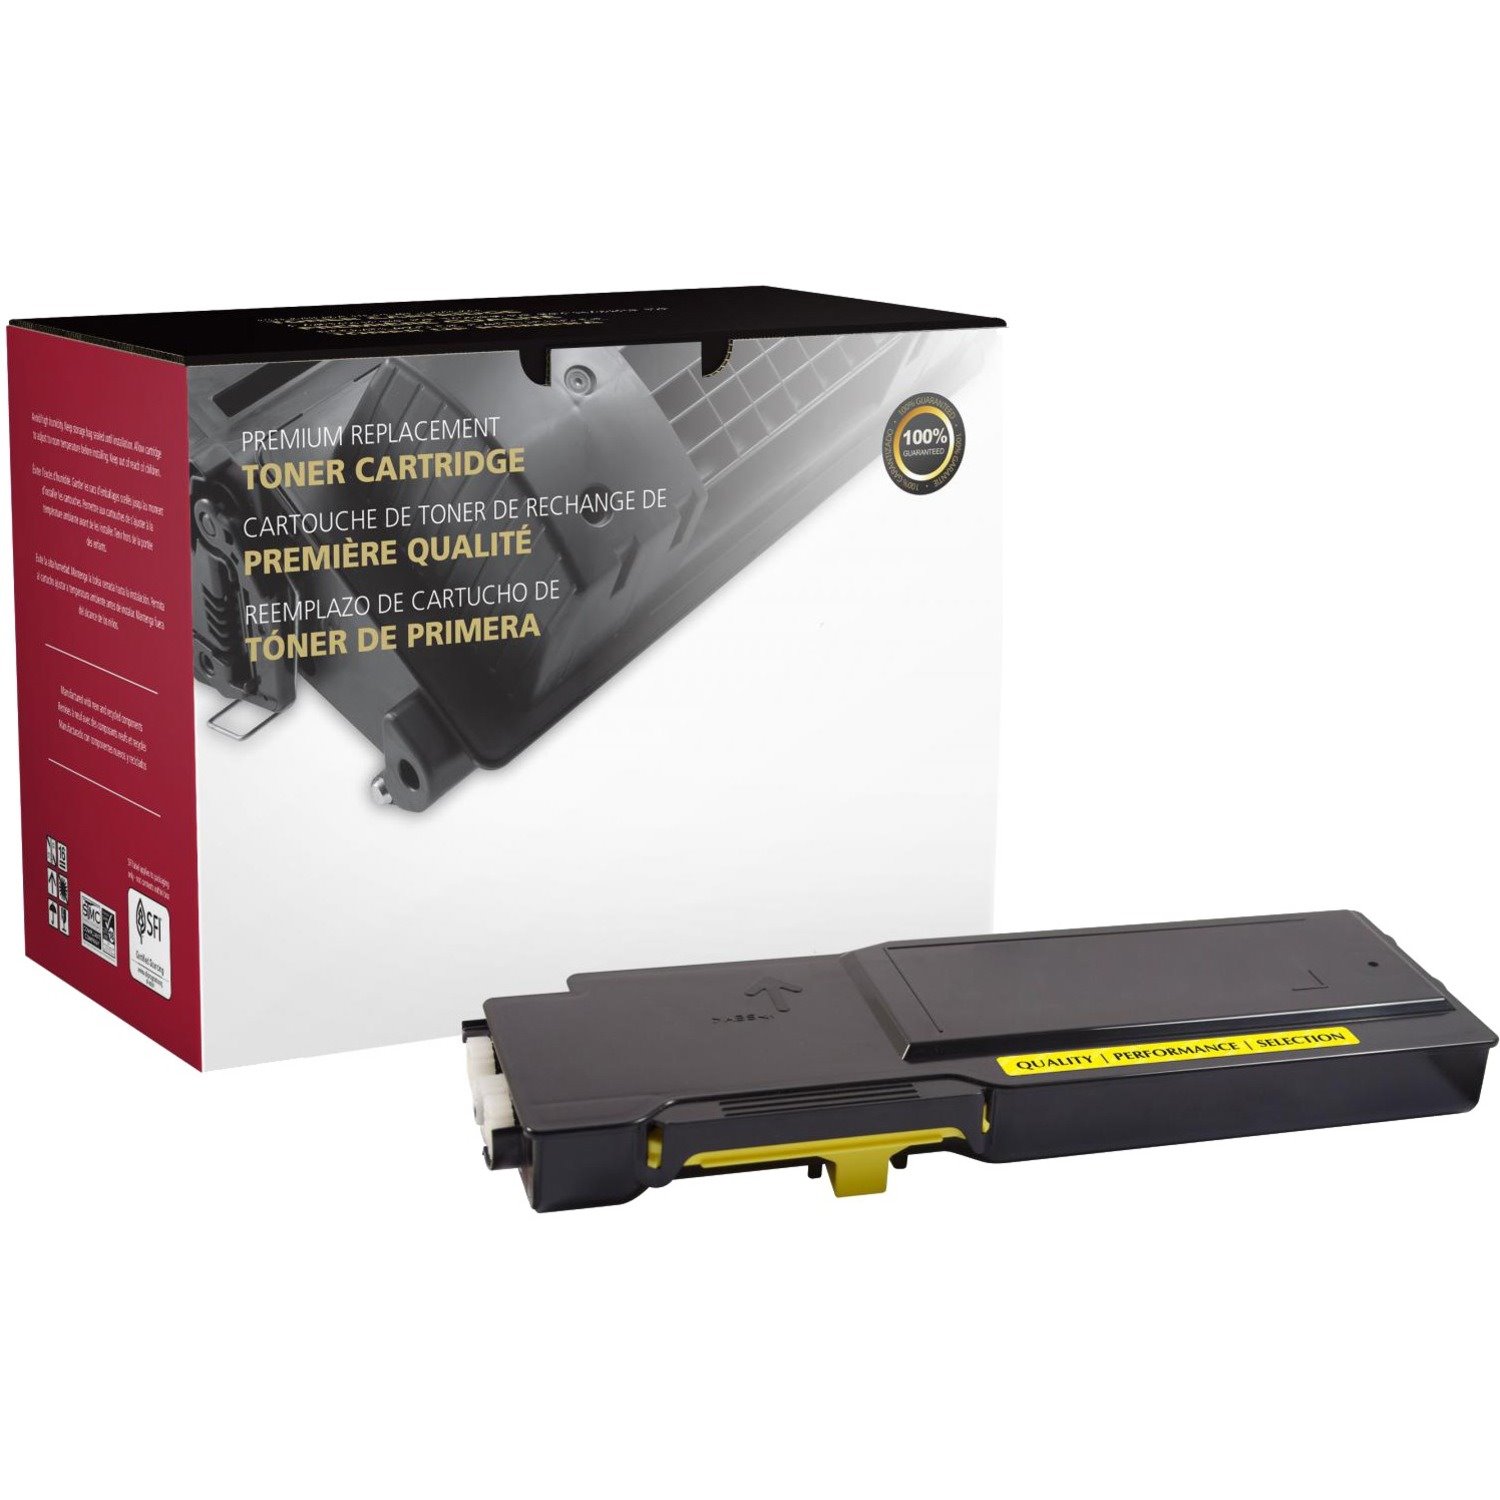 Clover Technologies Remanufactured Extra High Yield Laser Toner Cartridge - Alternative for Xerox (106R03525) - Yellow Pack